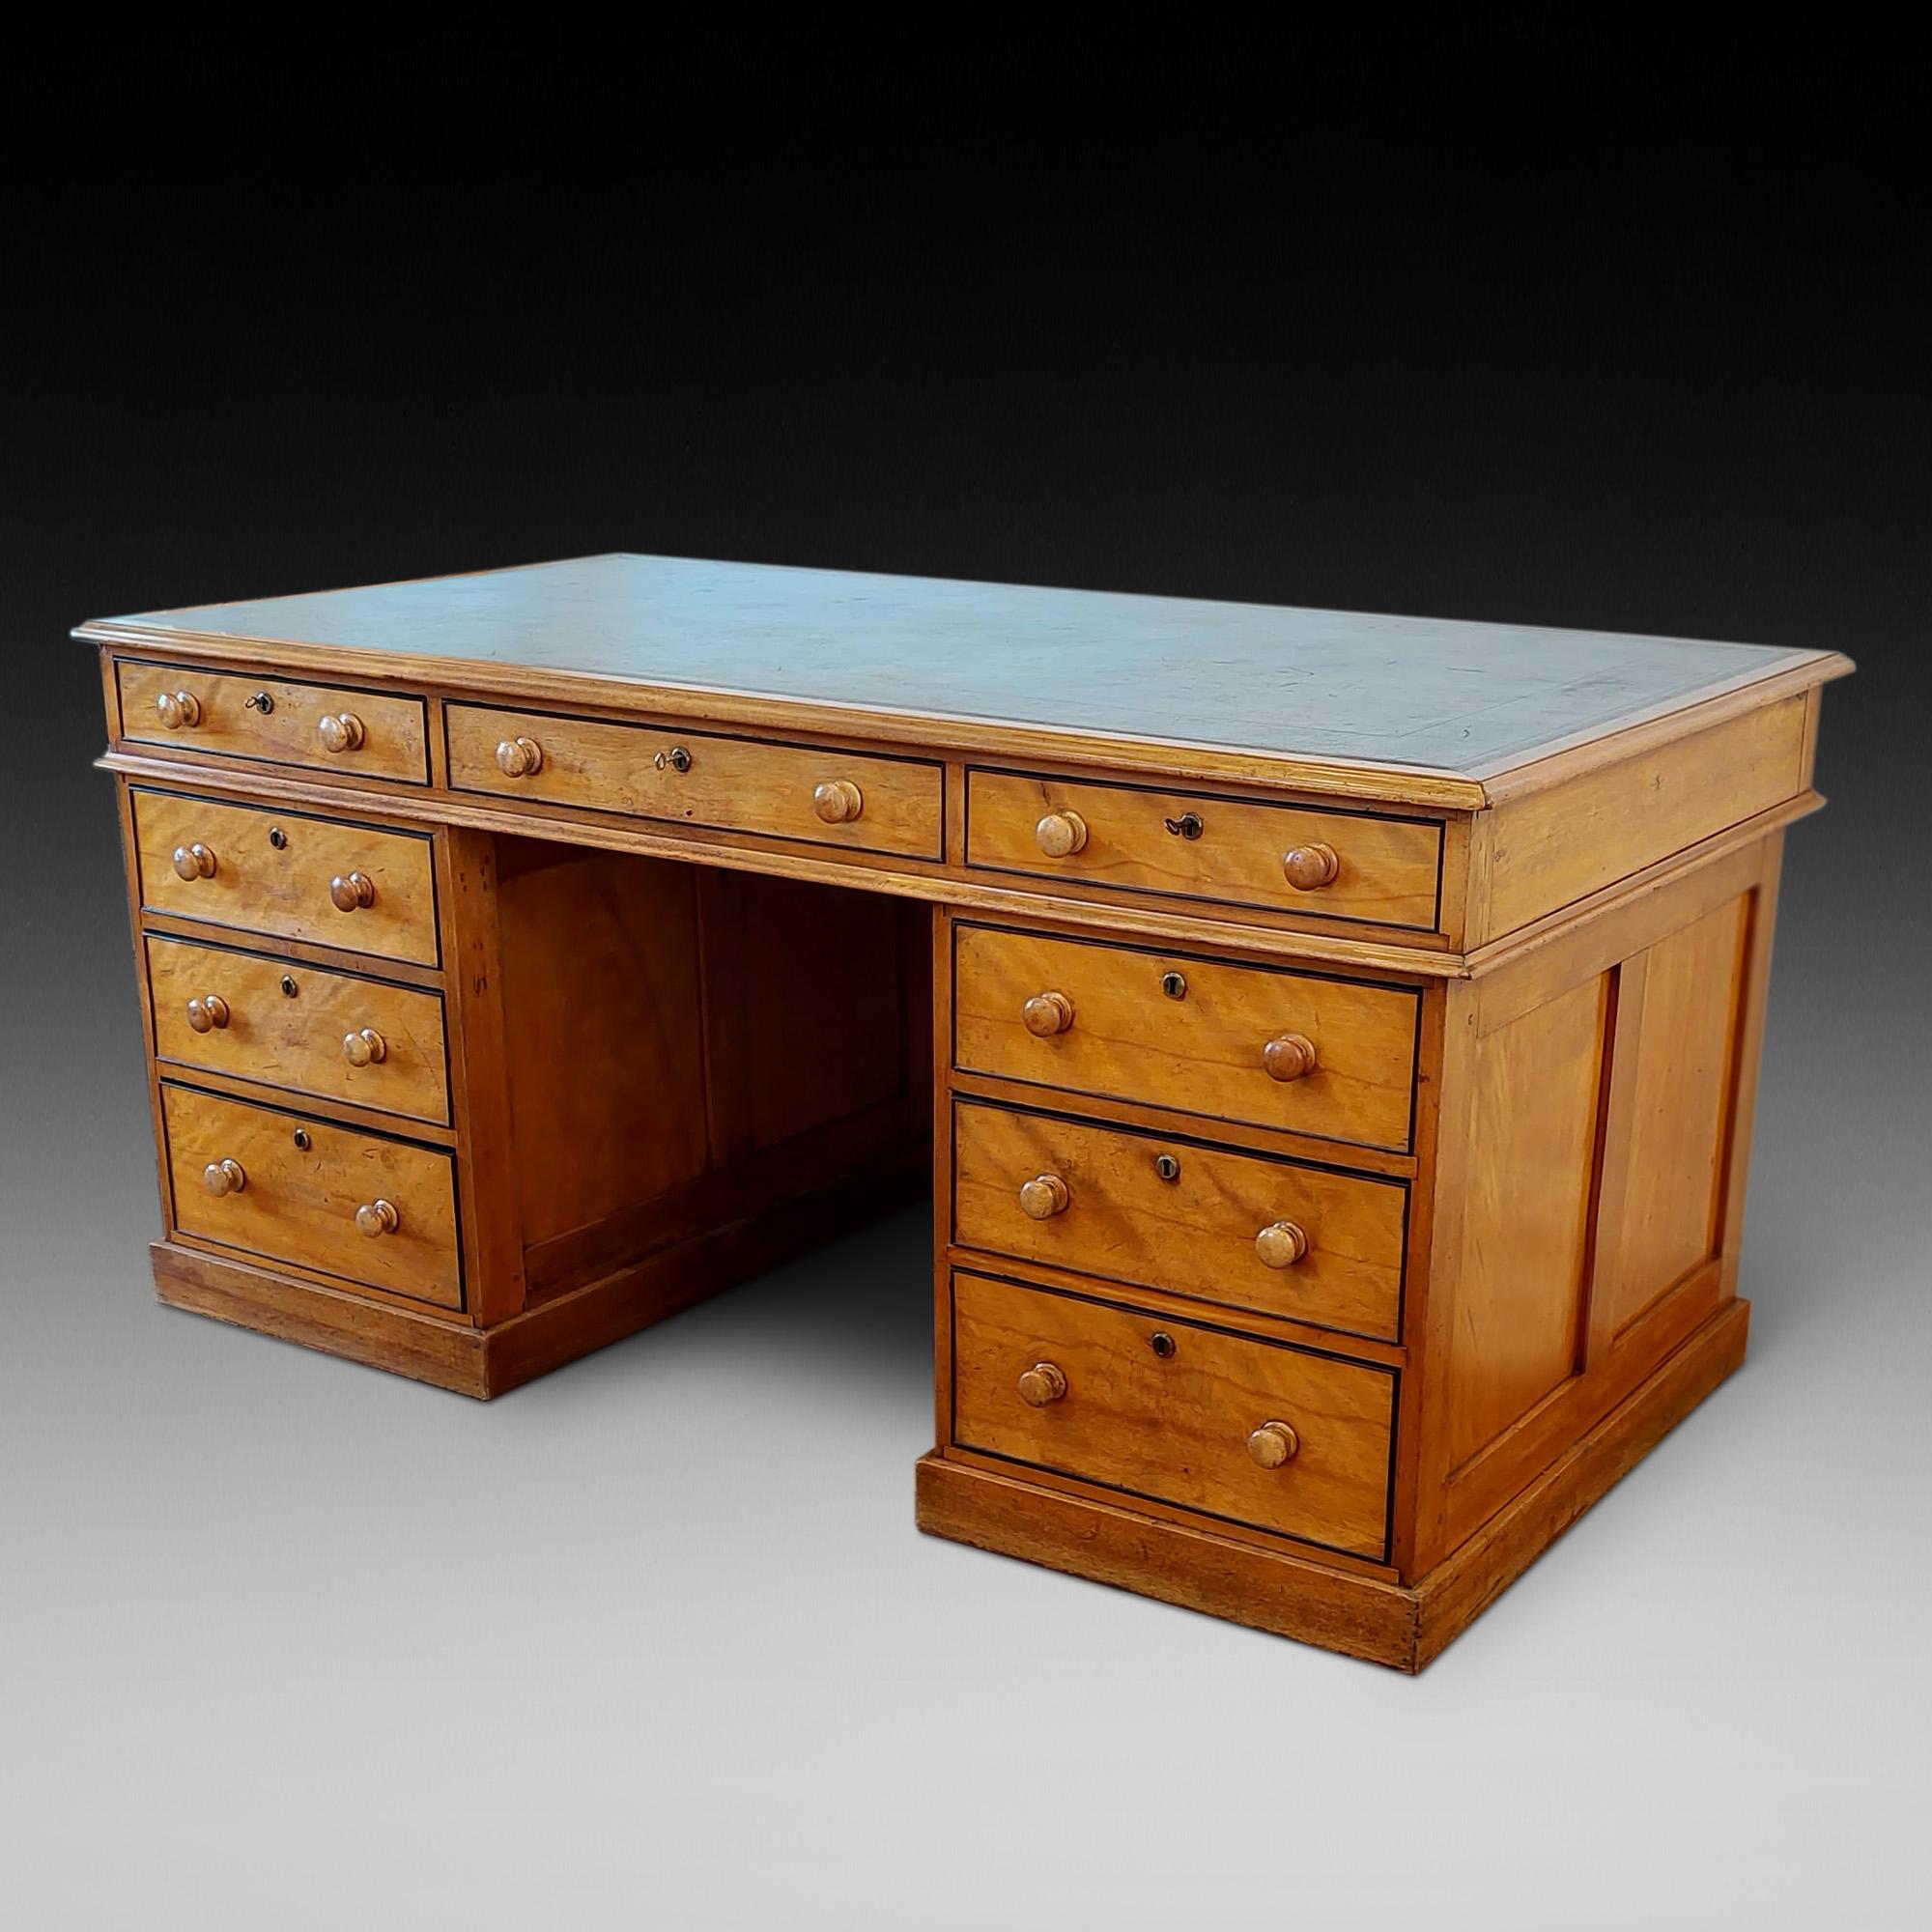 A fabulous Victorian partners desk in beautiful mellow sycamore - double pedestal with front drawers and cupboard rear with tooled leather insert top  c1860 - 66